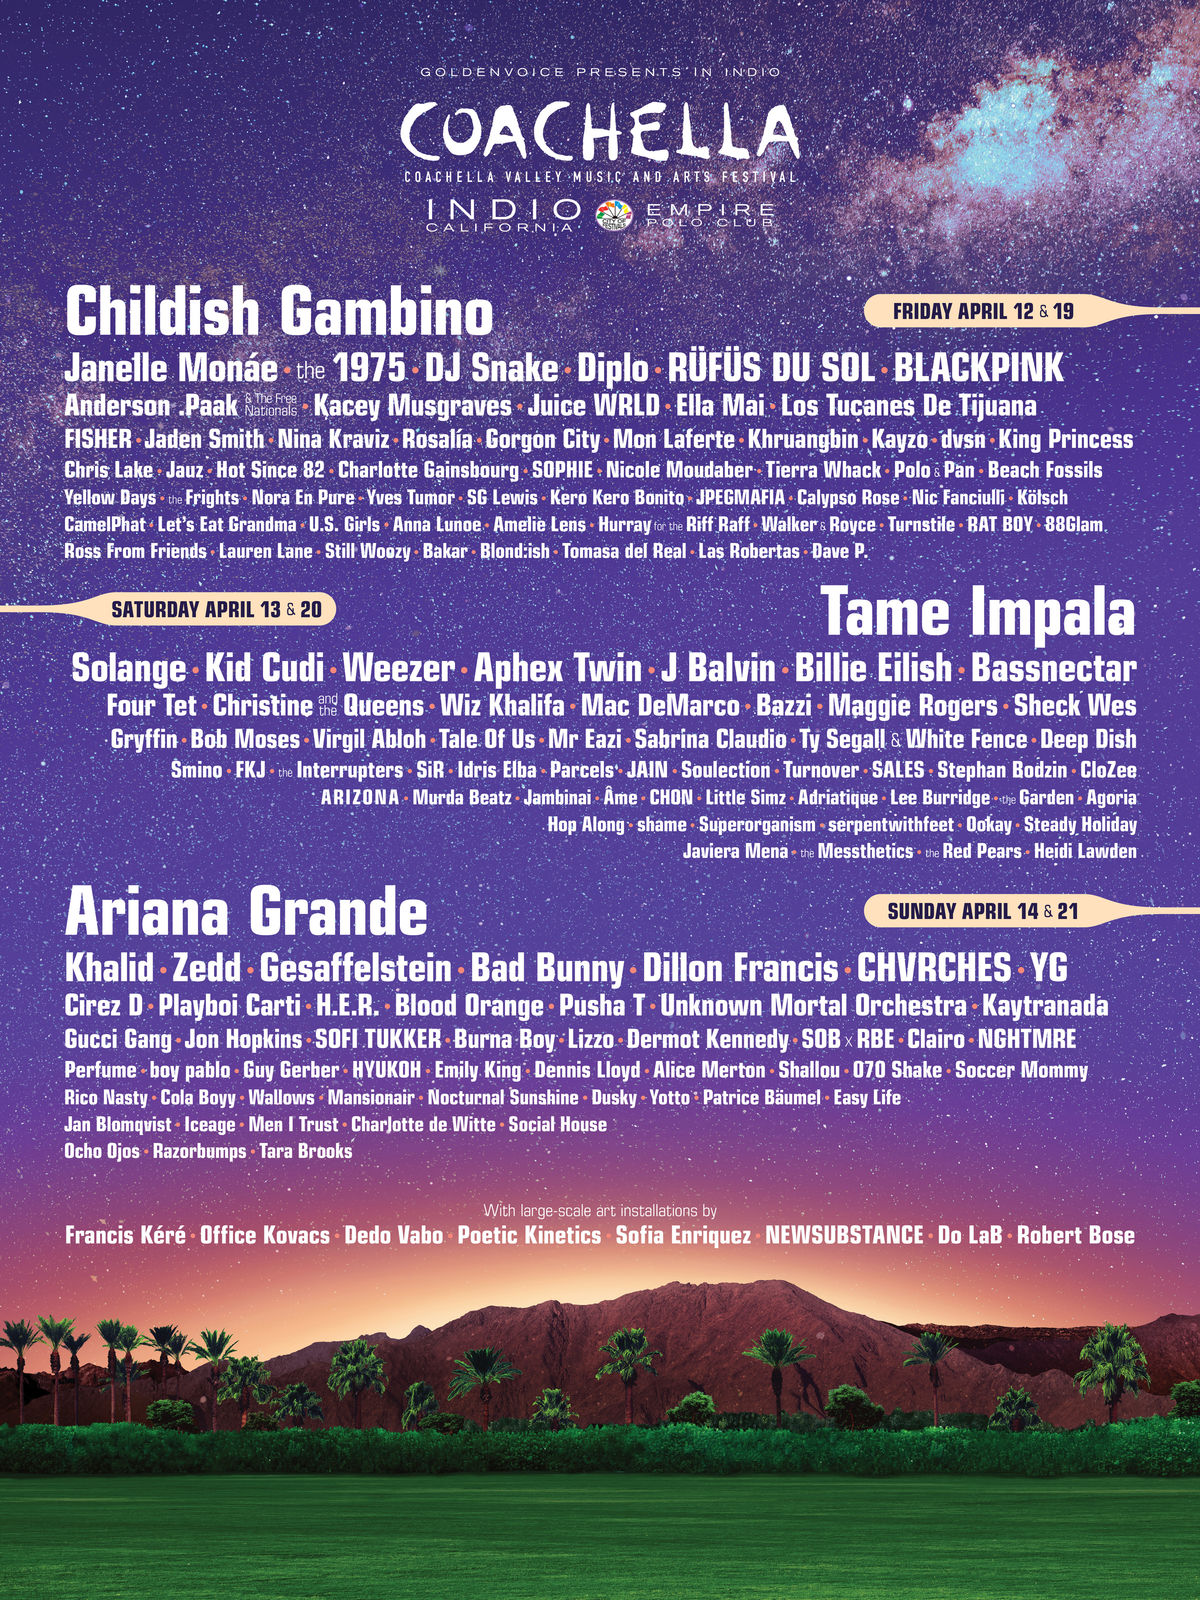 2019 Coachella poster featuring the full weekend lineup. 